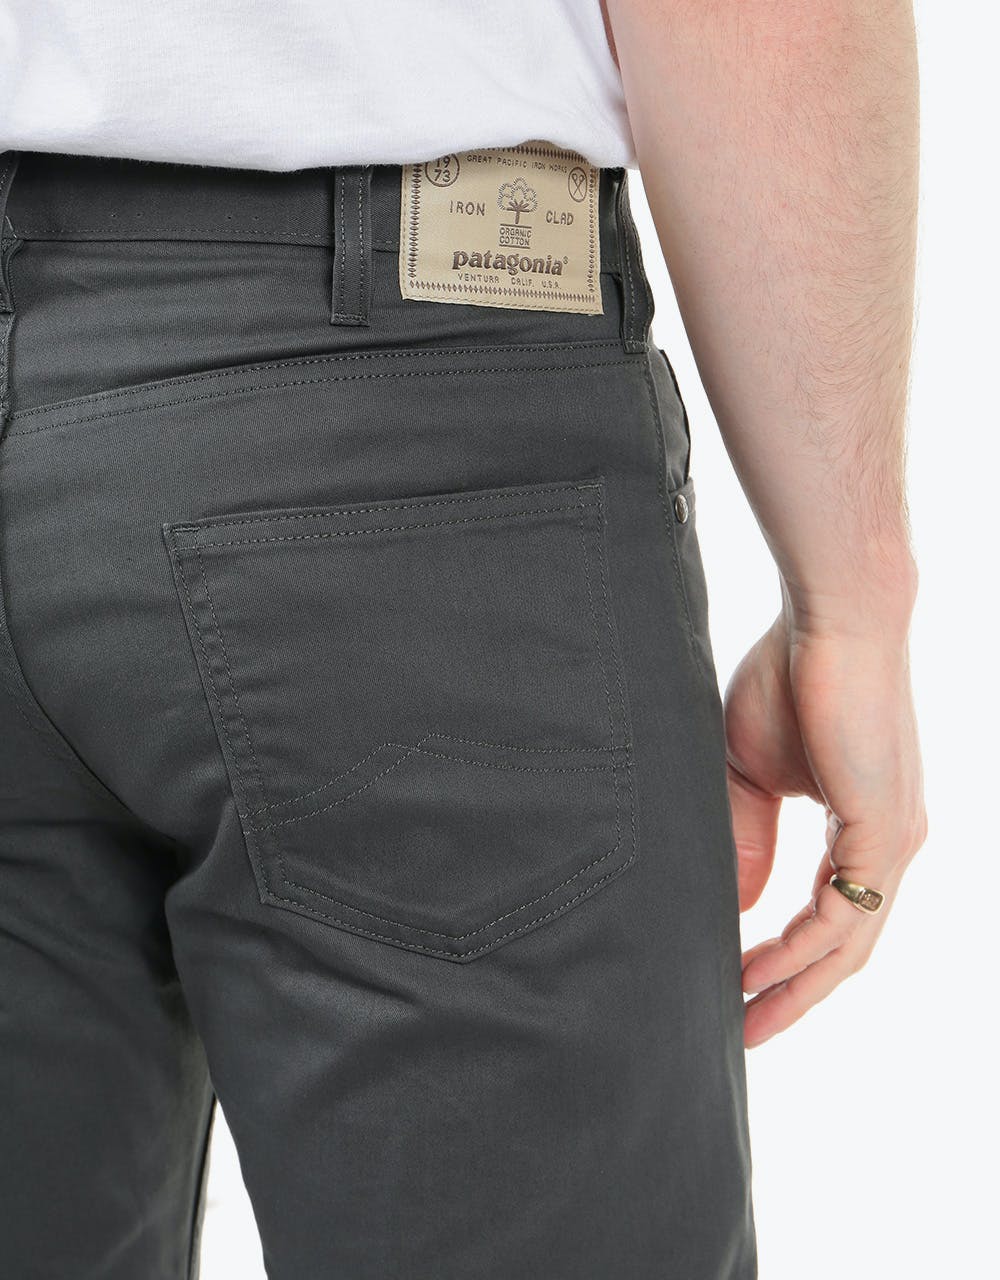 Patagonia Performance Twill Jeans - Forge Grey